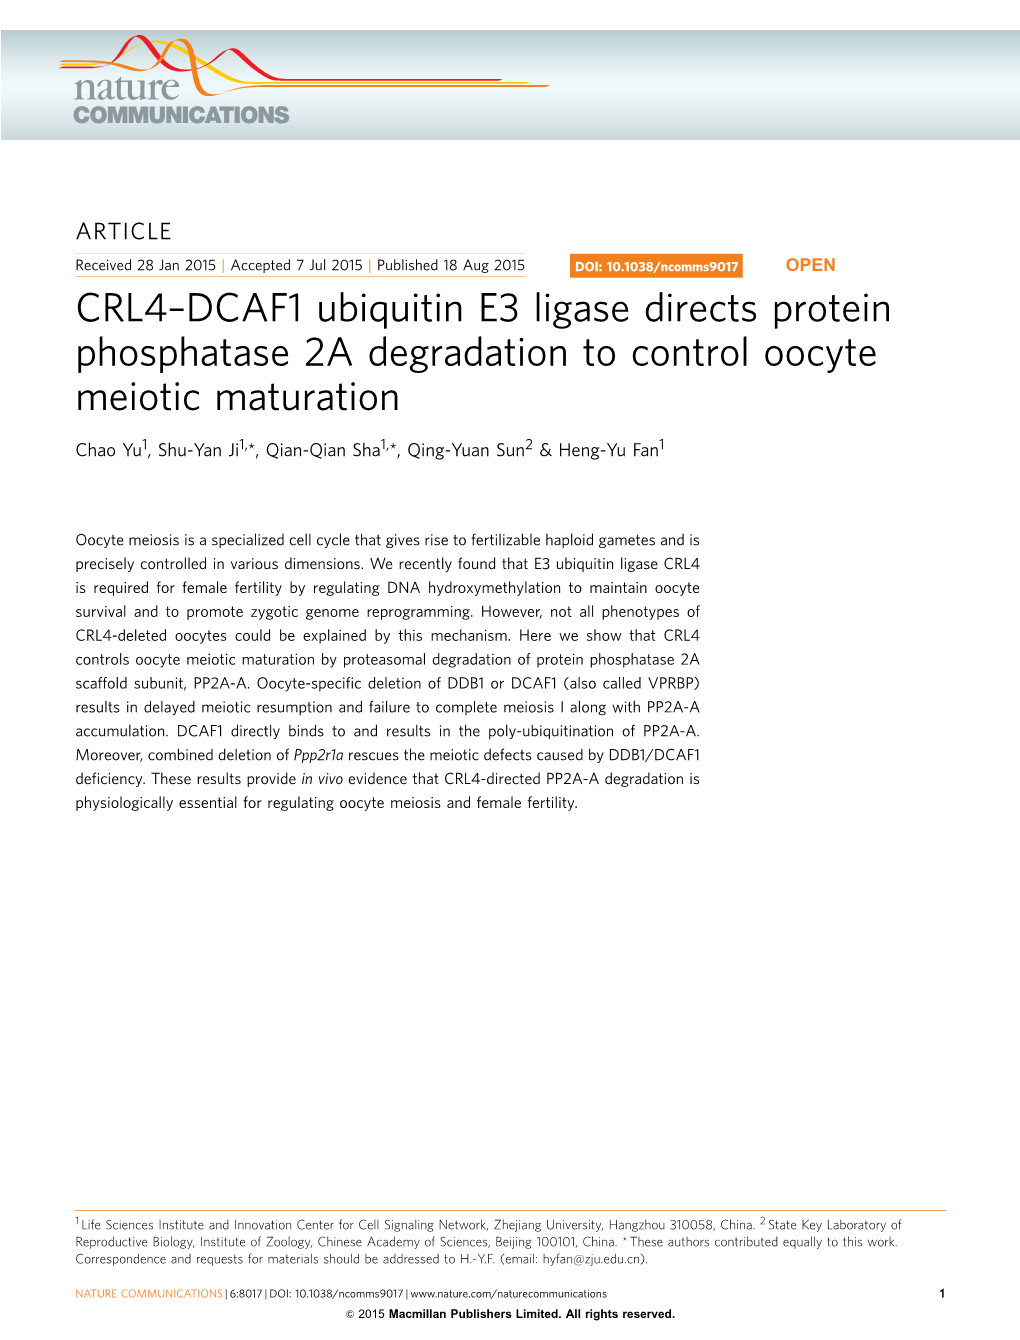 DCAF1 Ubiquitin E3 Ligase Directs Protein Phosphatase 2A Degradation to Control Oocyte Meiotic Maturation